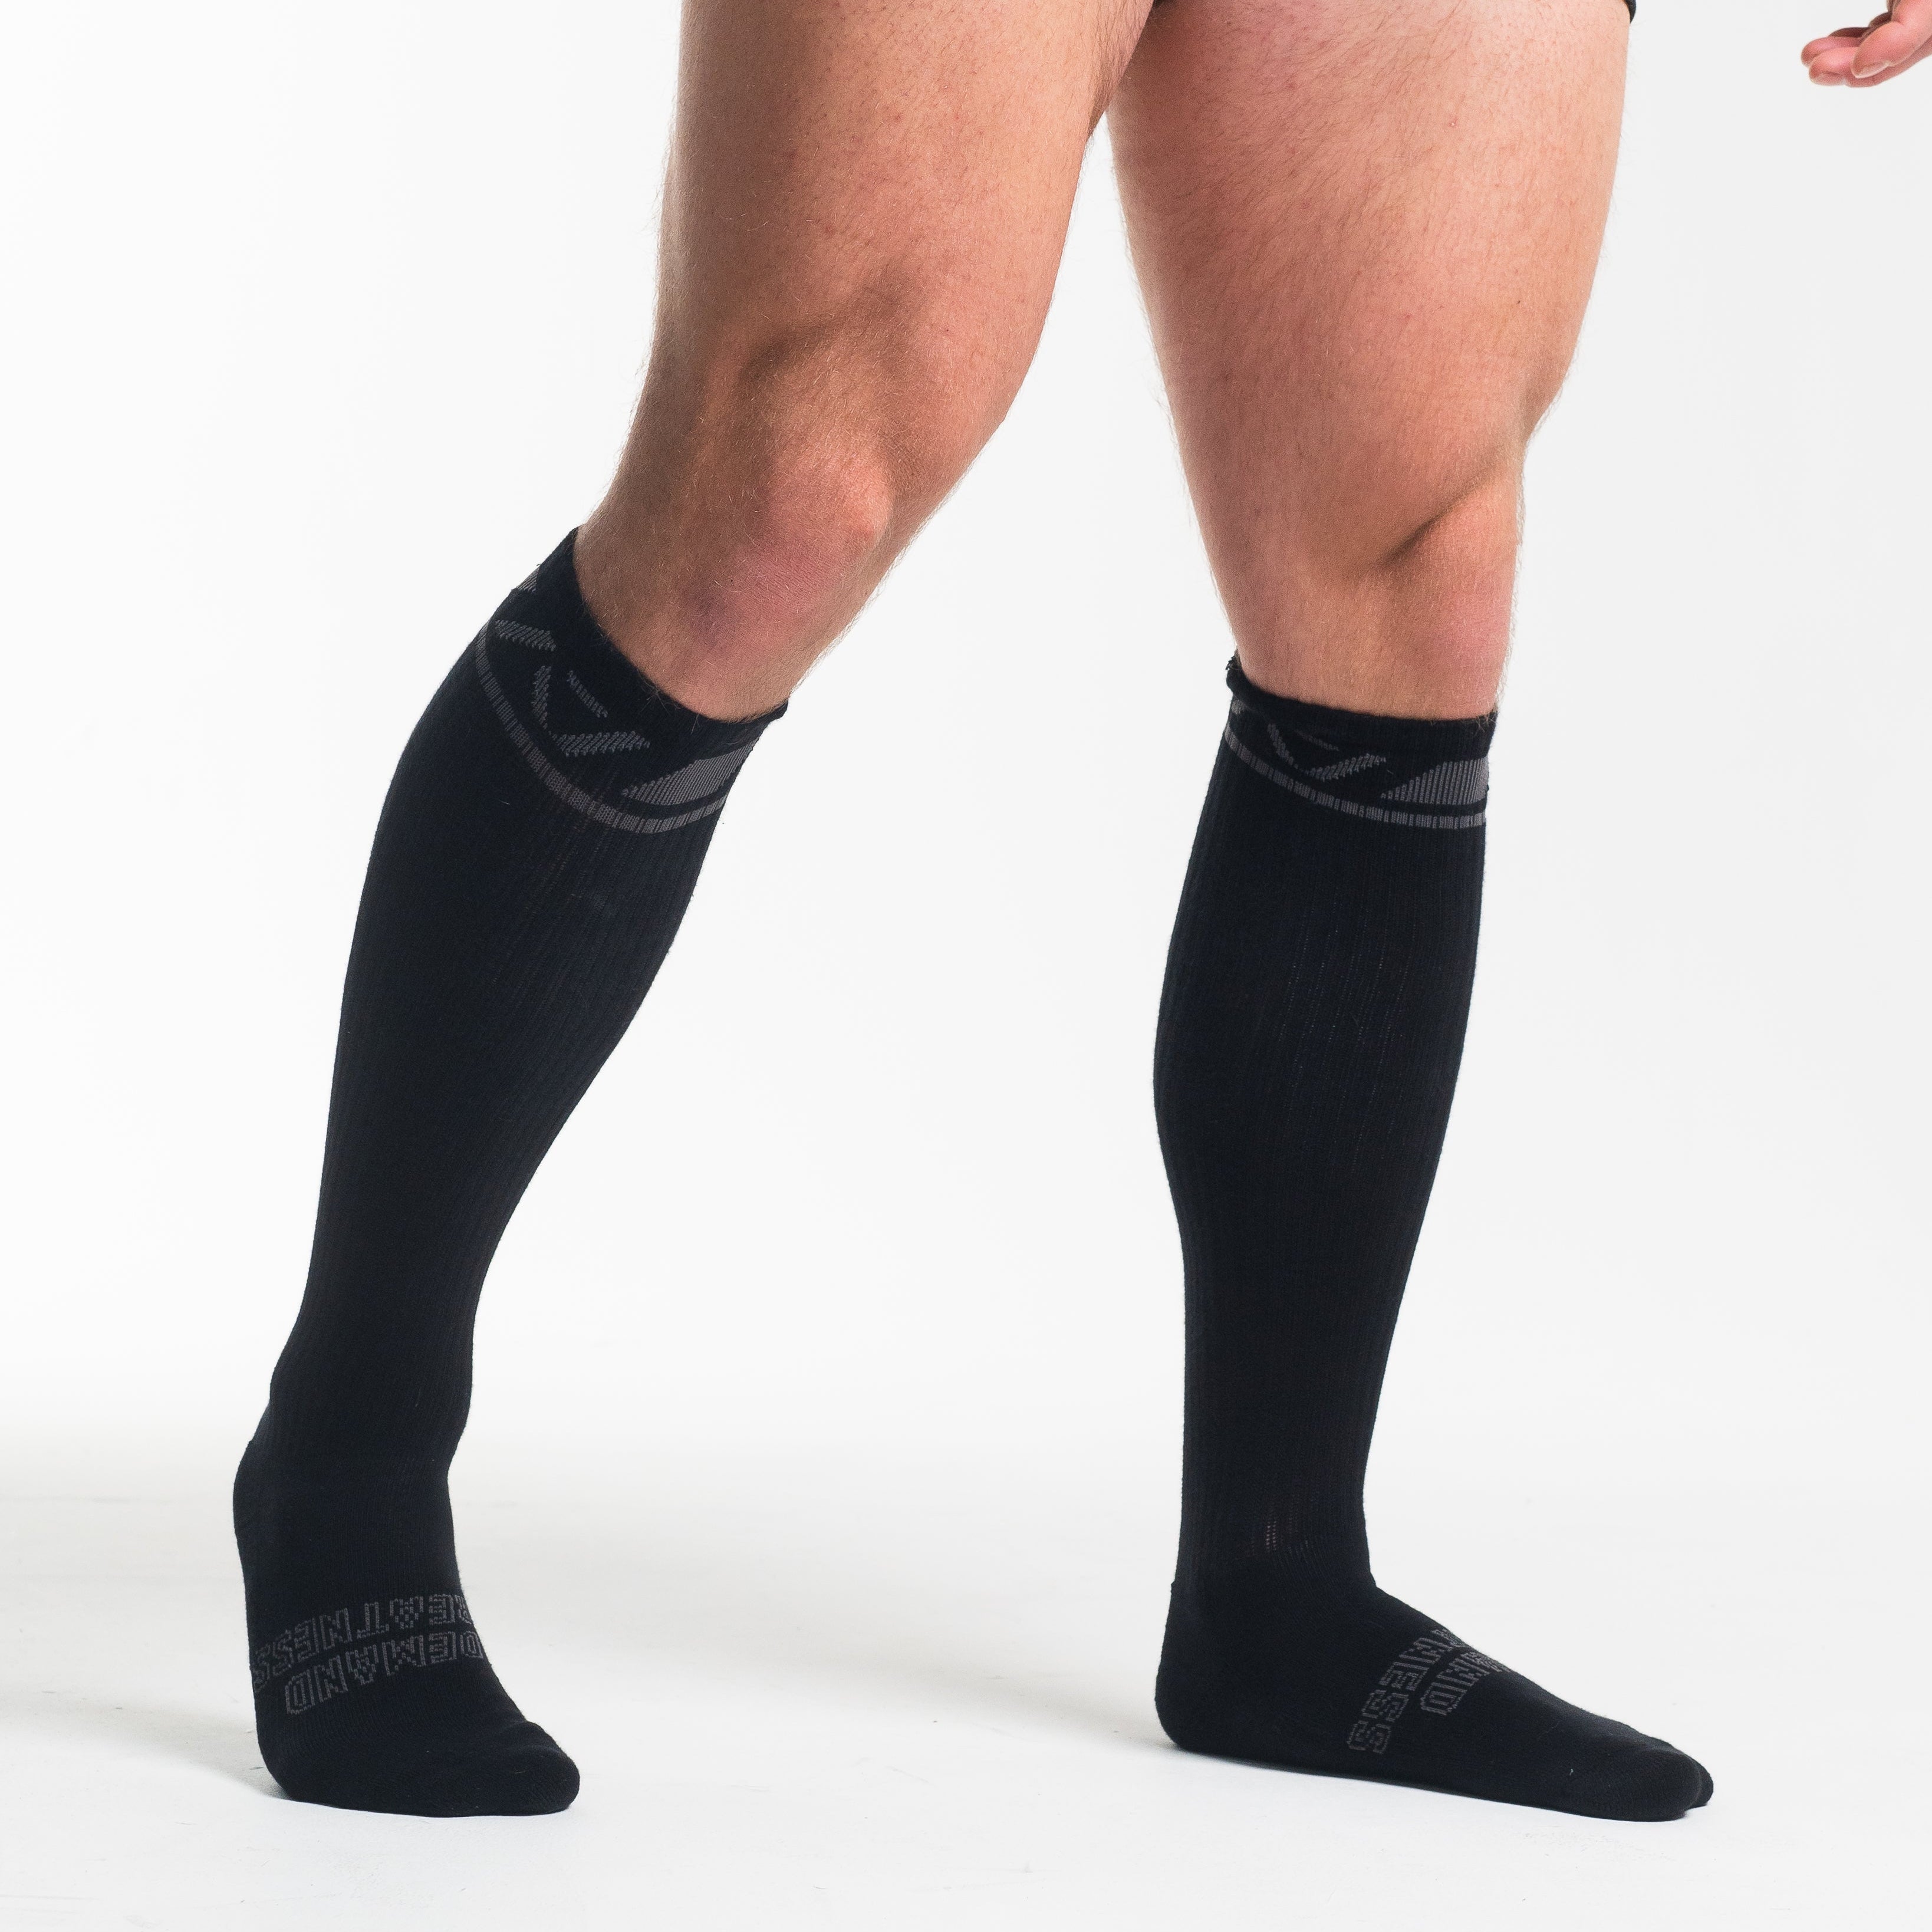 A7 Shadow Stone Deadlift socks are designed specifically for pulls and keep your shins protected from scrapes. A7 deadlift socks are a perfect pair to wear in training or powerlifting competition. The IPF Approved Kit includes Powerlifting Singlet, A7 Meet Shirt, A7 Zebra Wrist Wraps, A7 Deadlift Socks, Hourglass Knee Sleeves (Stiff Knee Sleeves and Rigor Mortis Knee Sleeves). Genouillères powerlifting shipping to France, Spain, Ireland, Germany, Italy, Sweden and EU.